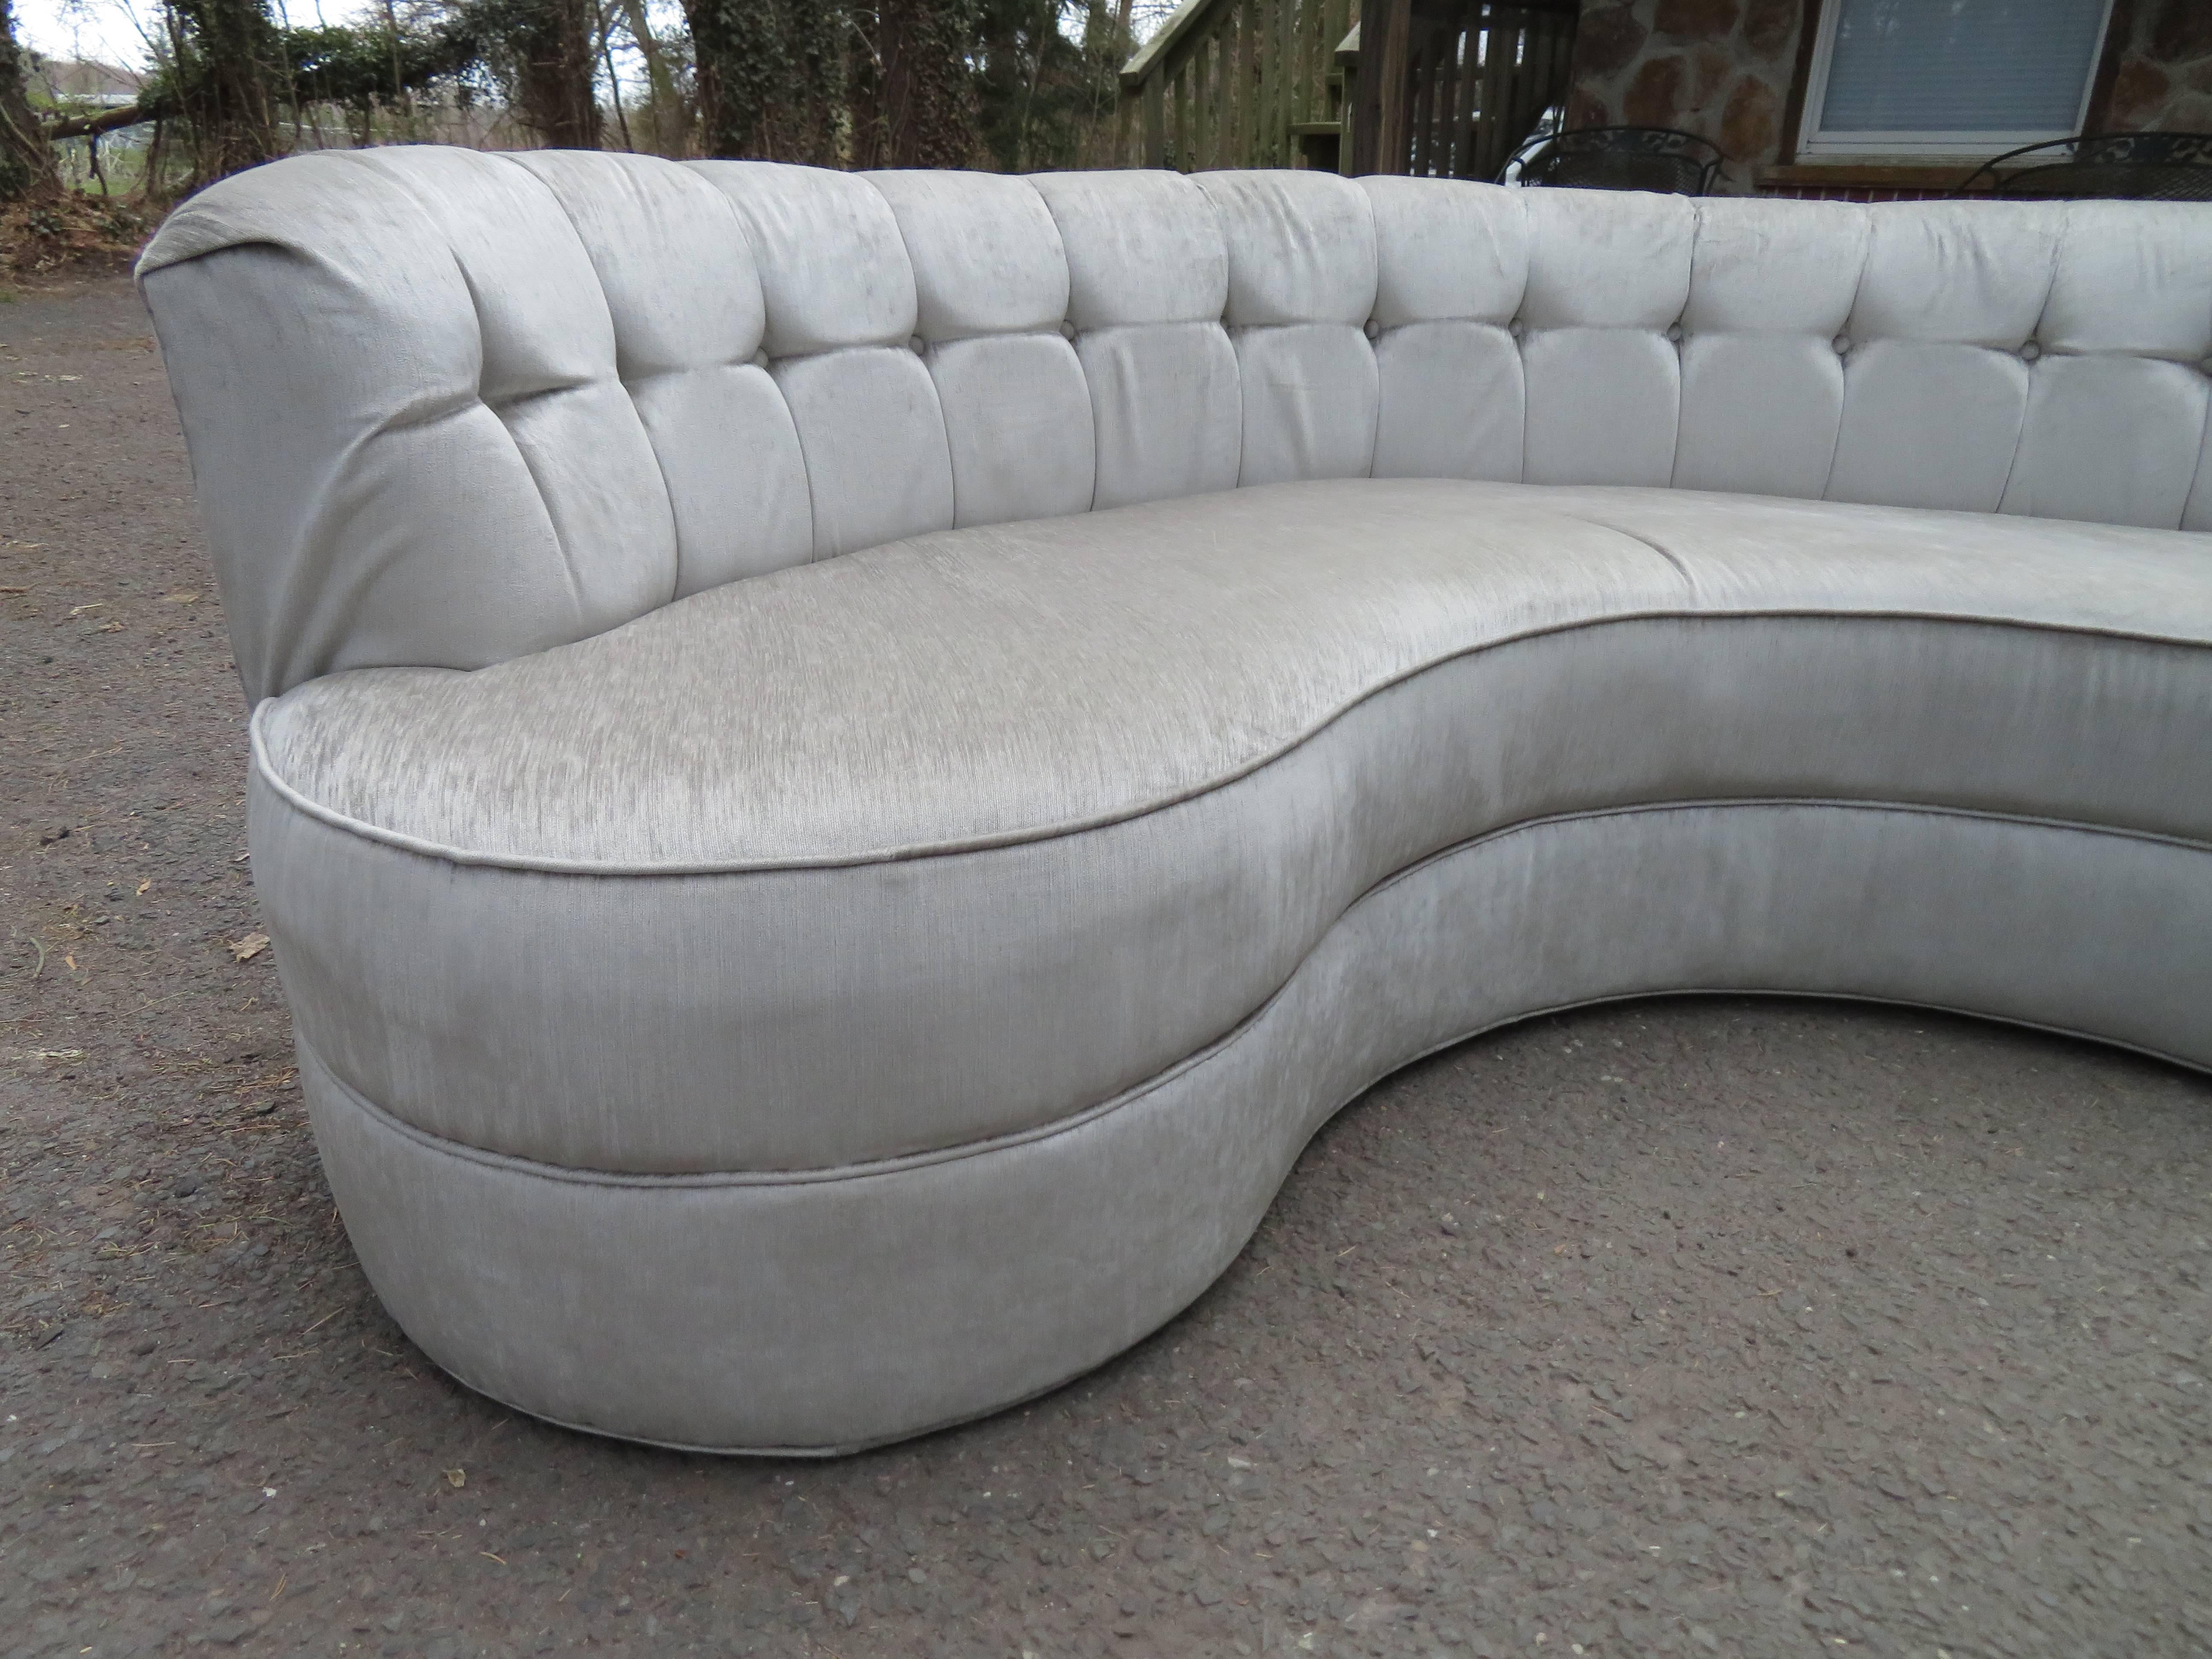 American Fabulous Pair Tufted Curved Kidney Sofas Mid-Century Modern